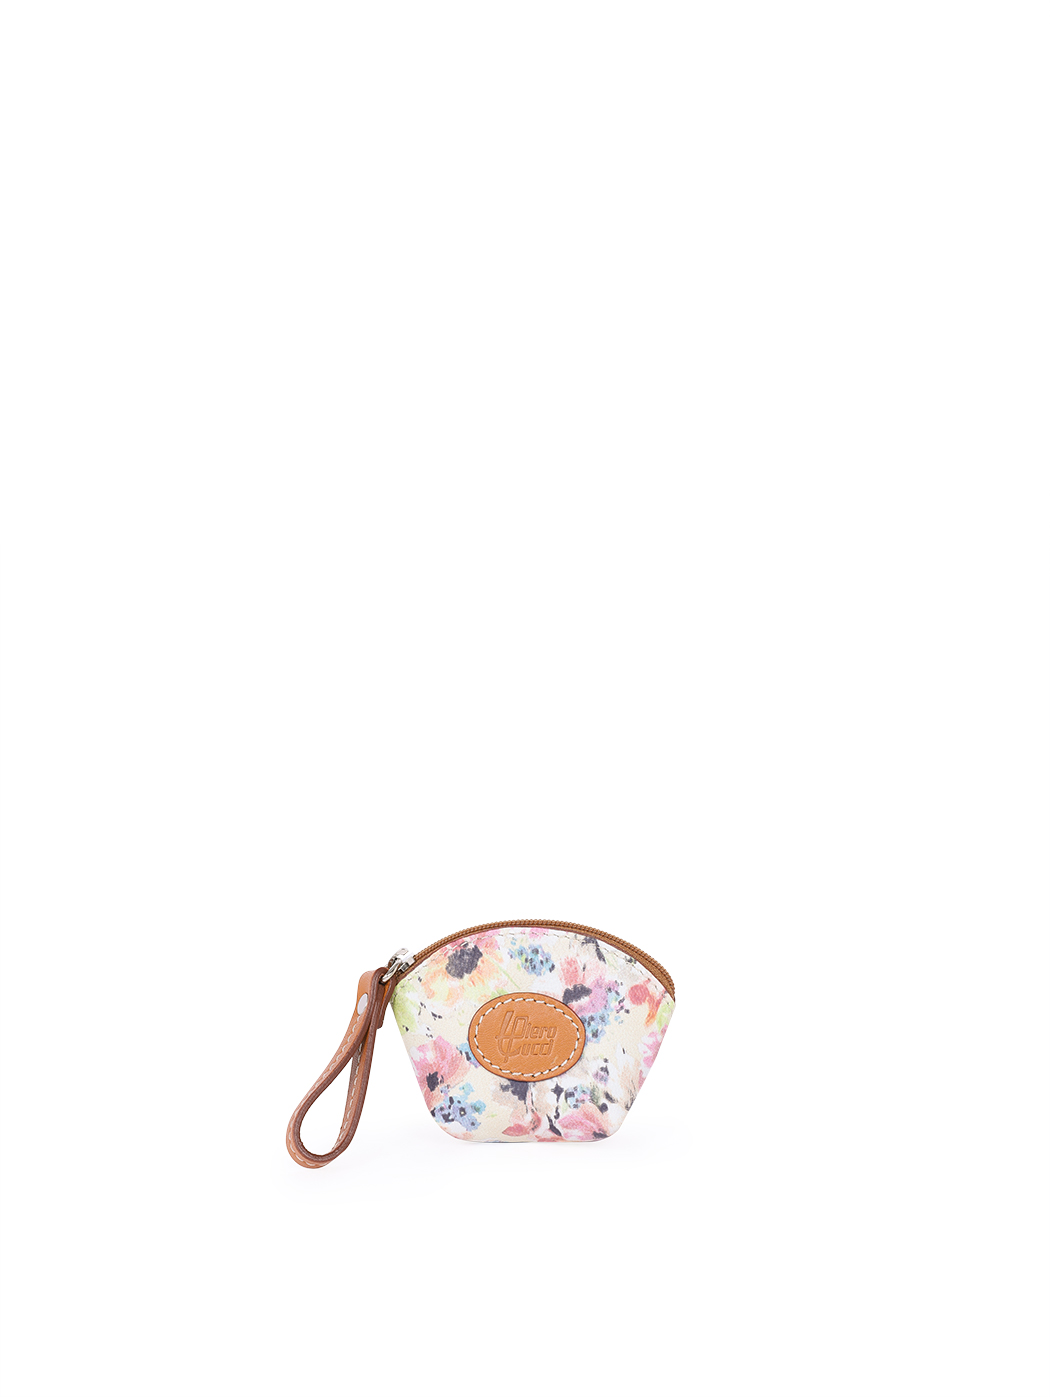 Leather Coin Pouch for Women from Campo dei Fiori